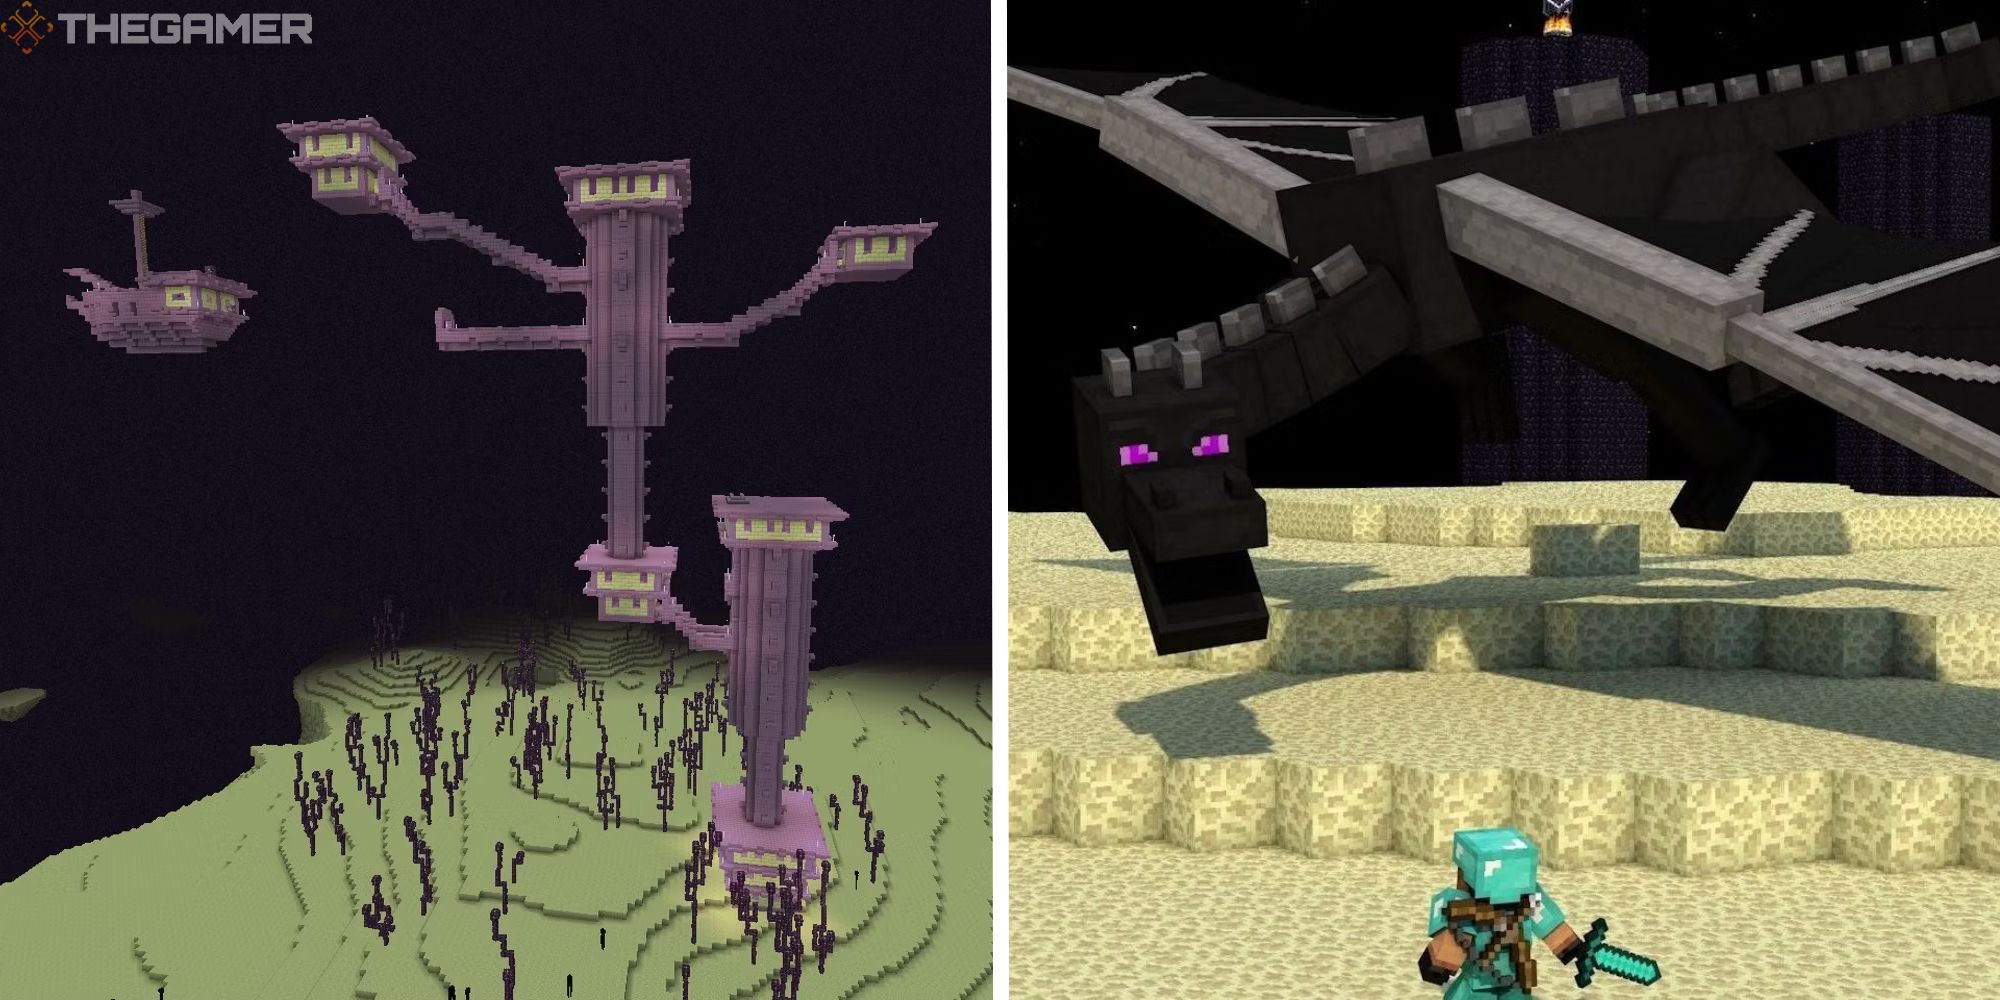 minecraft end city from a distance next to image of player fighting the ender dragon